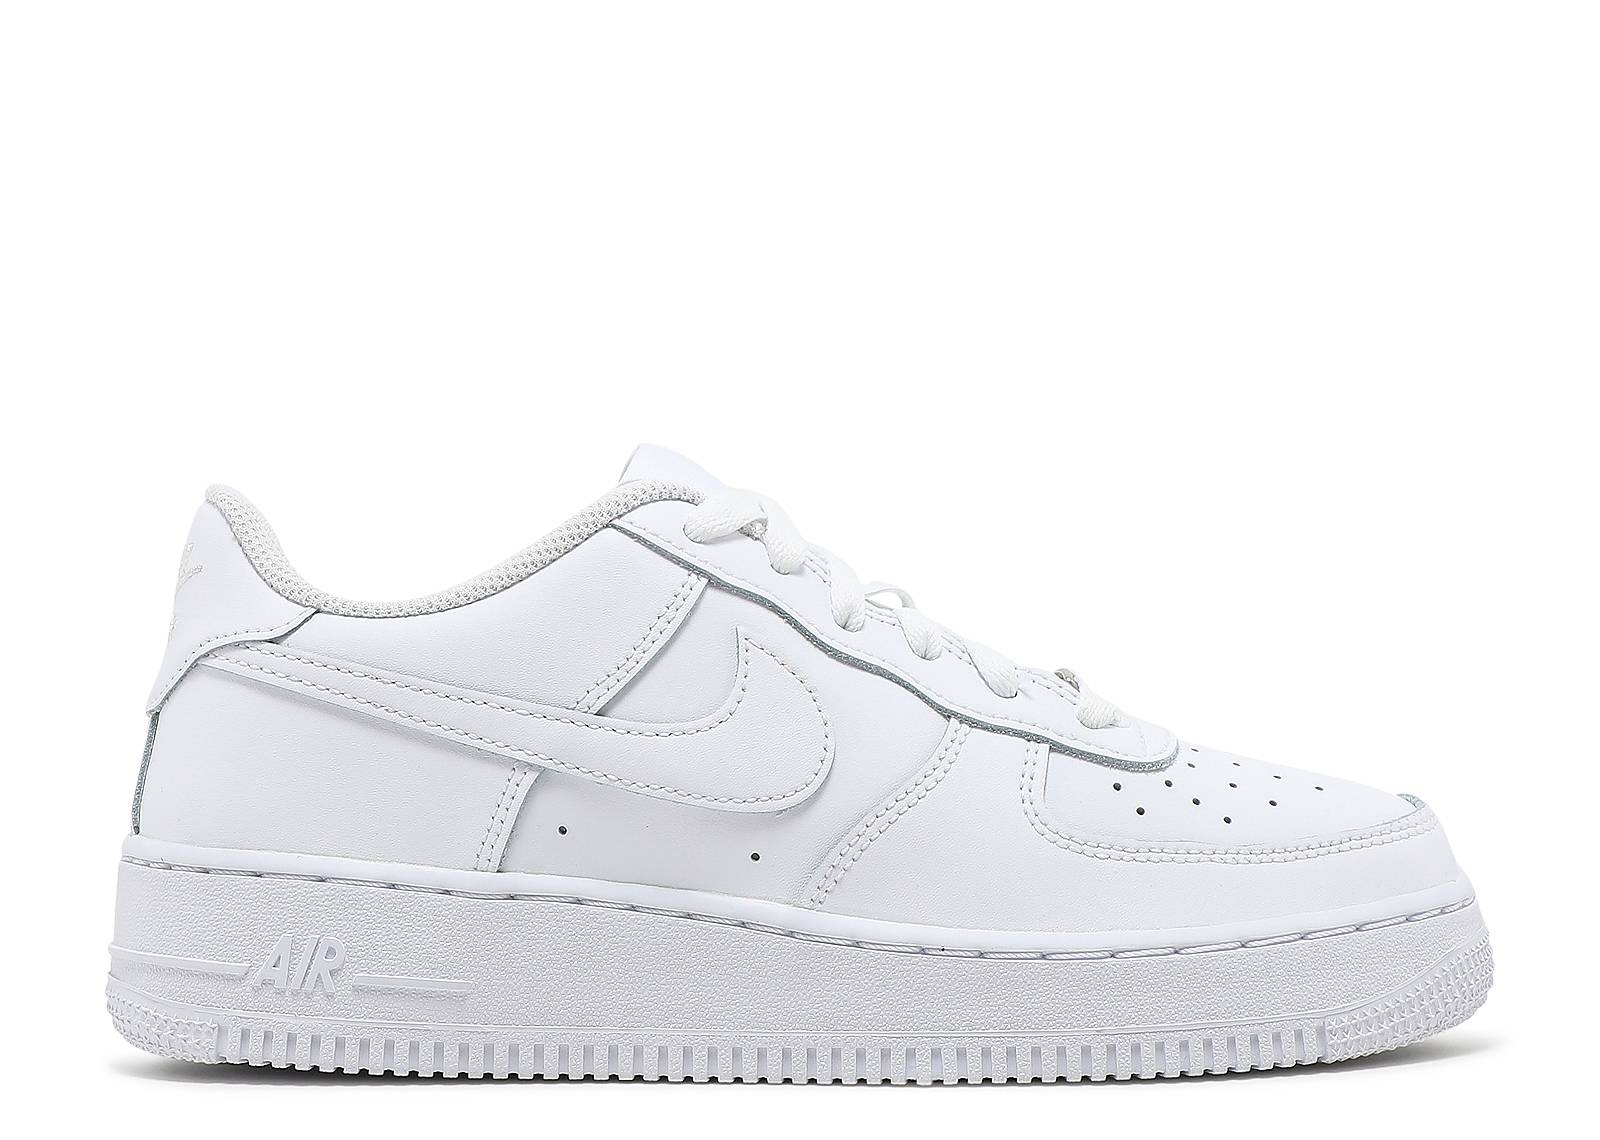 Nike Air Force 1 Low “Off-White Brooklyn” Size-10 Available In